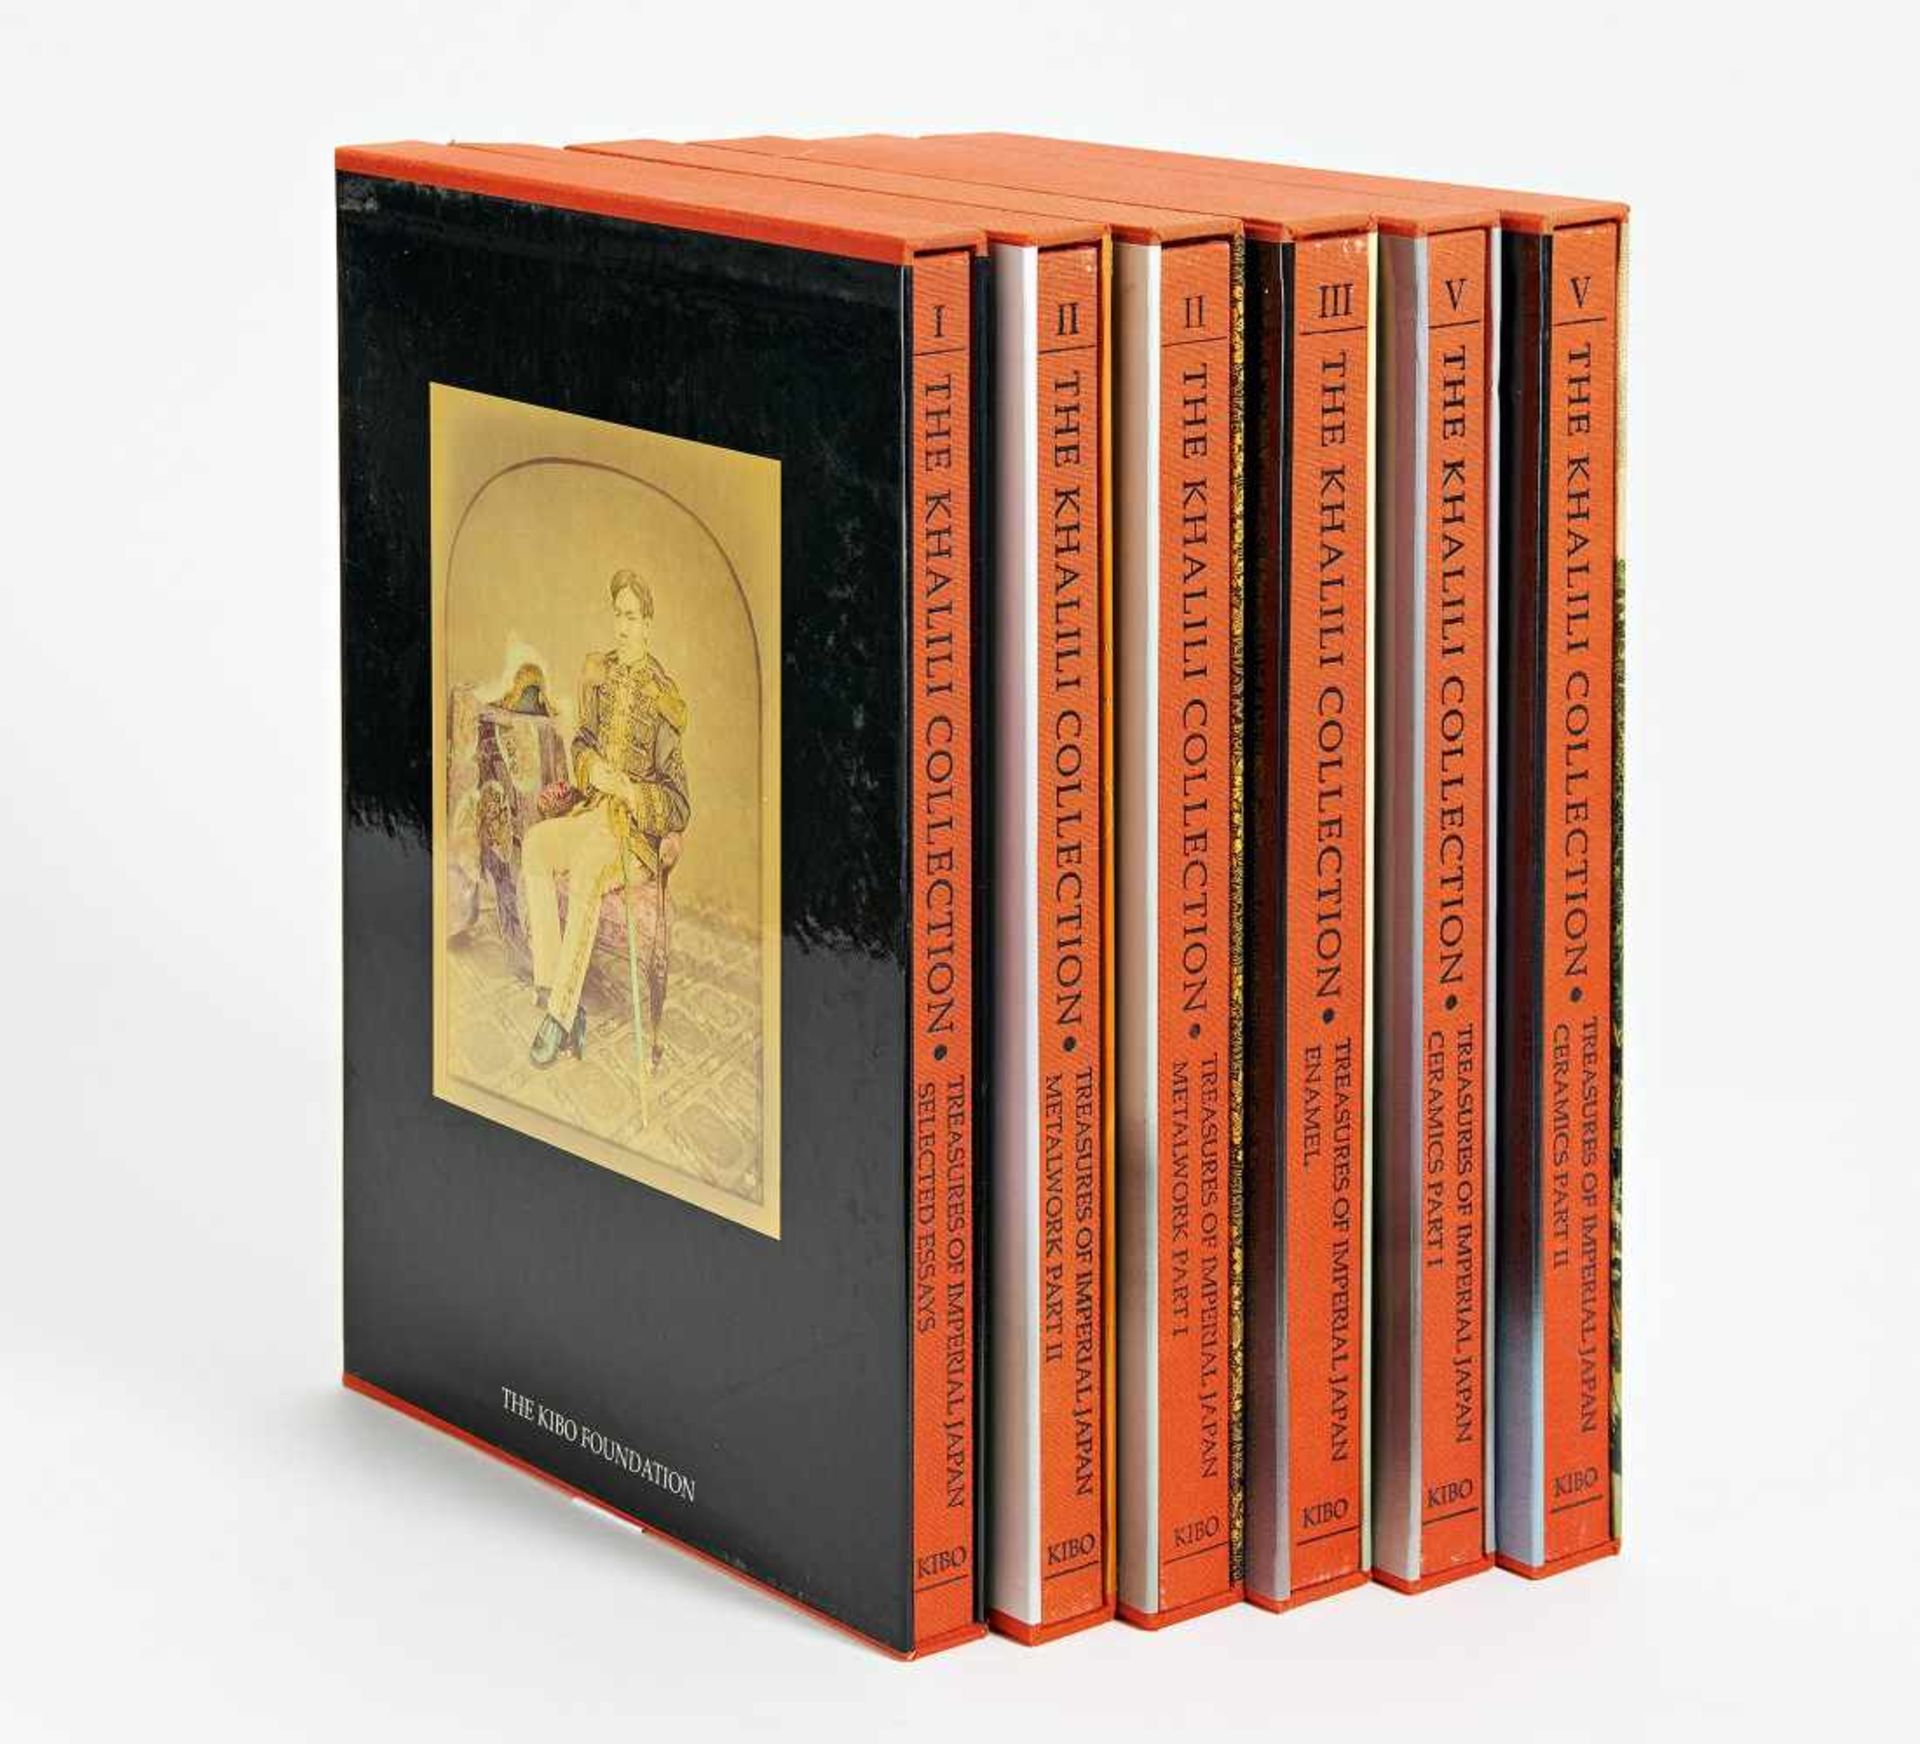 SIX VOLUMES OF THE KHALILI COLLECTION. 1995. With nummerous color illustrations. Hardback in